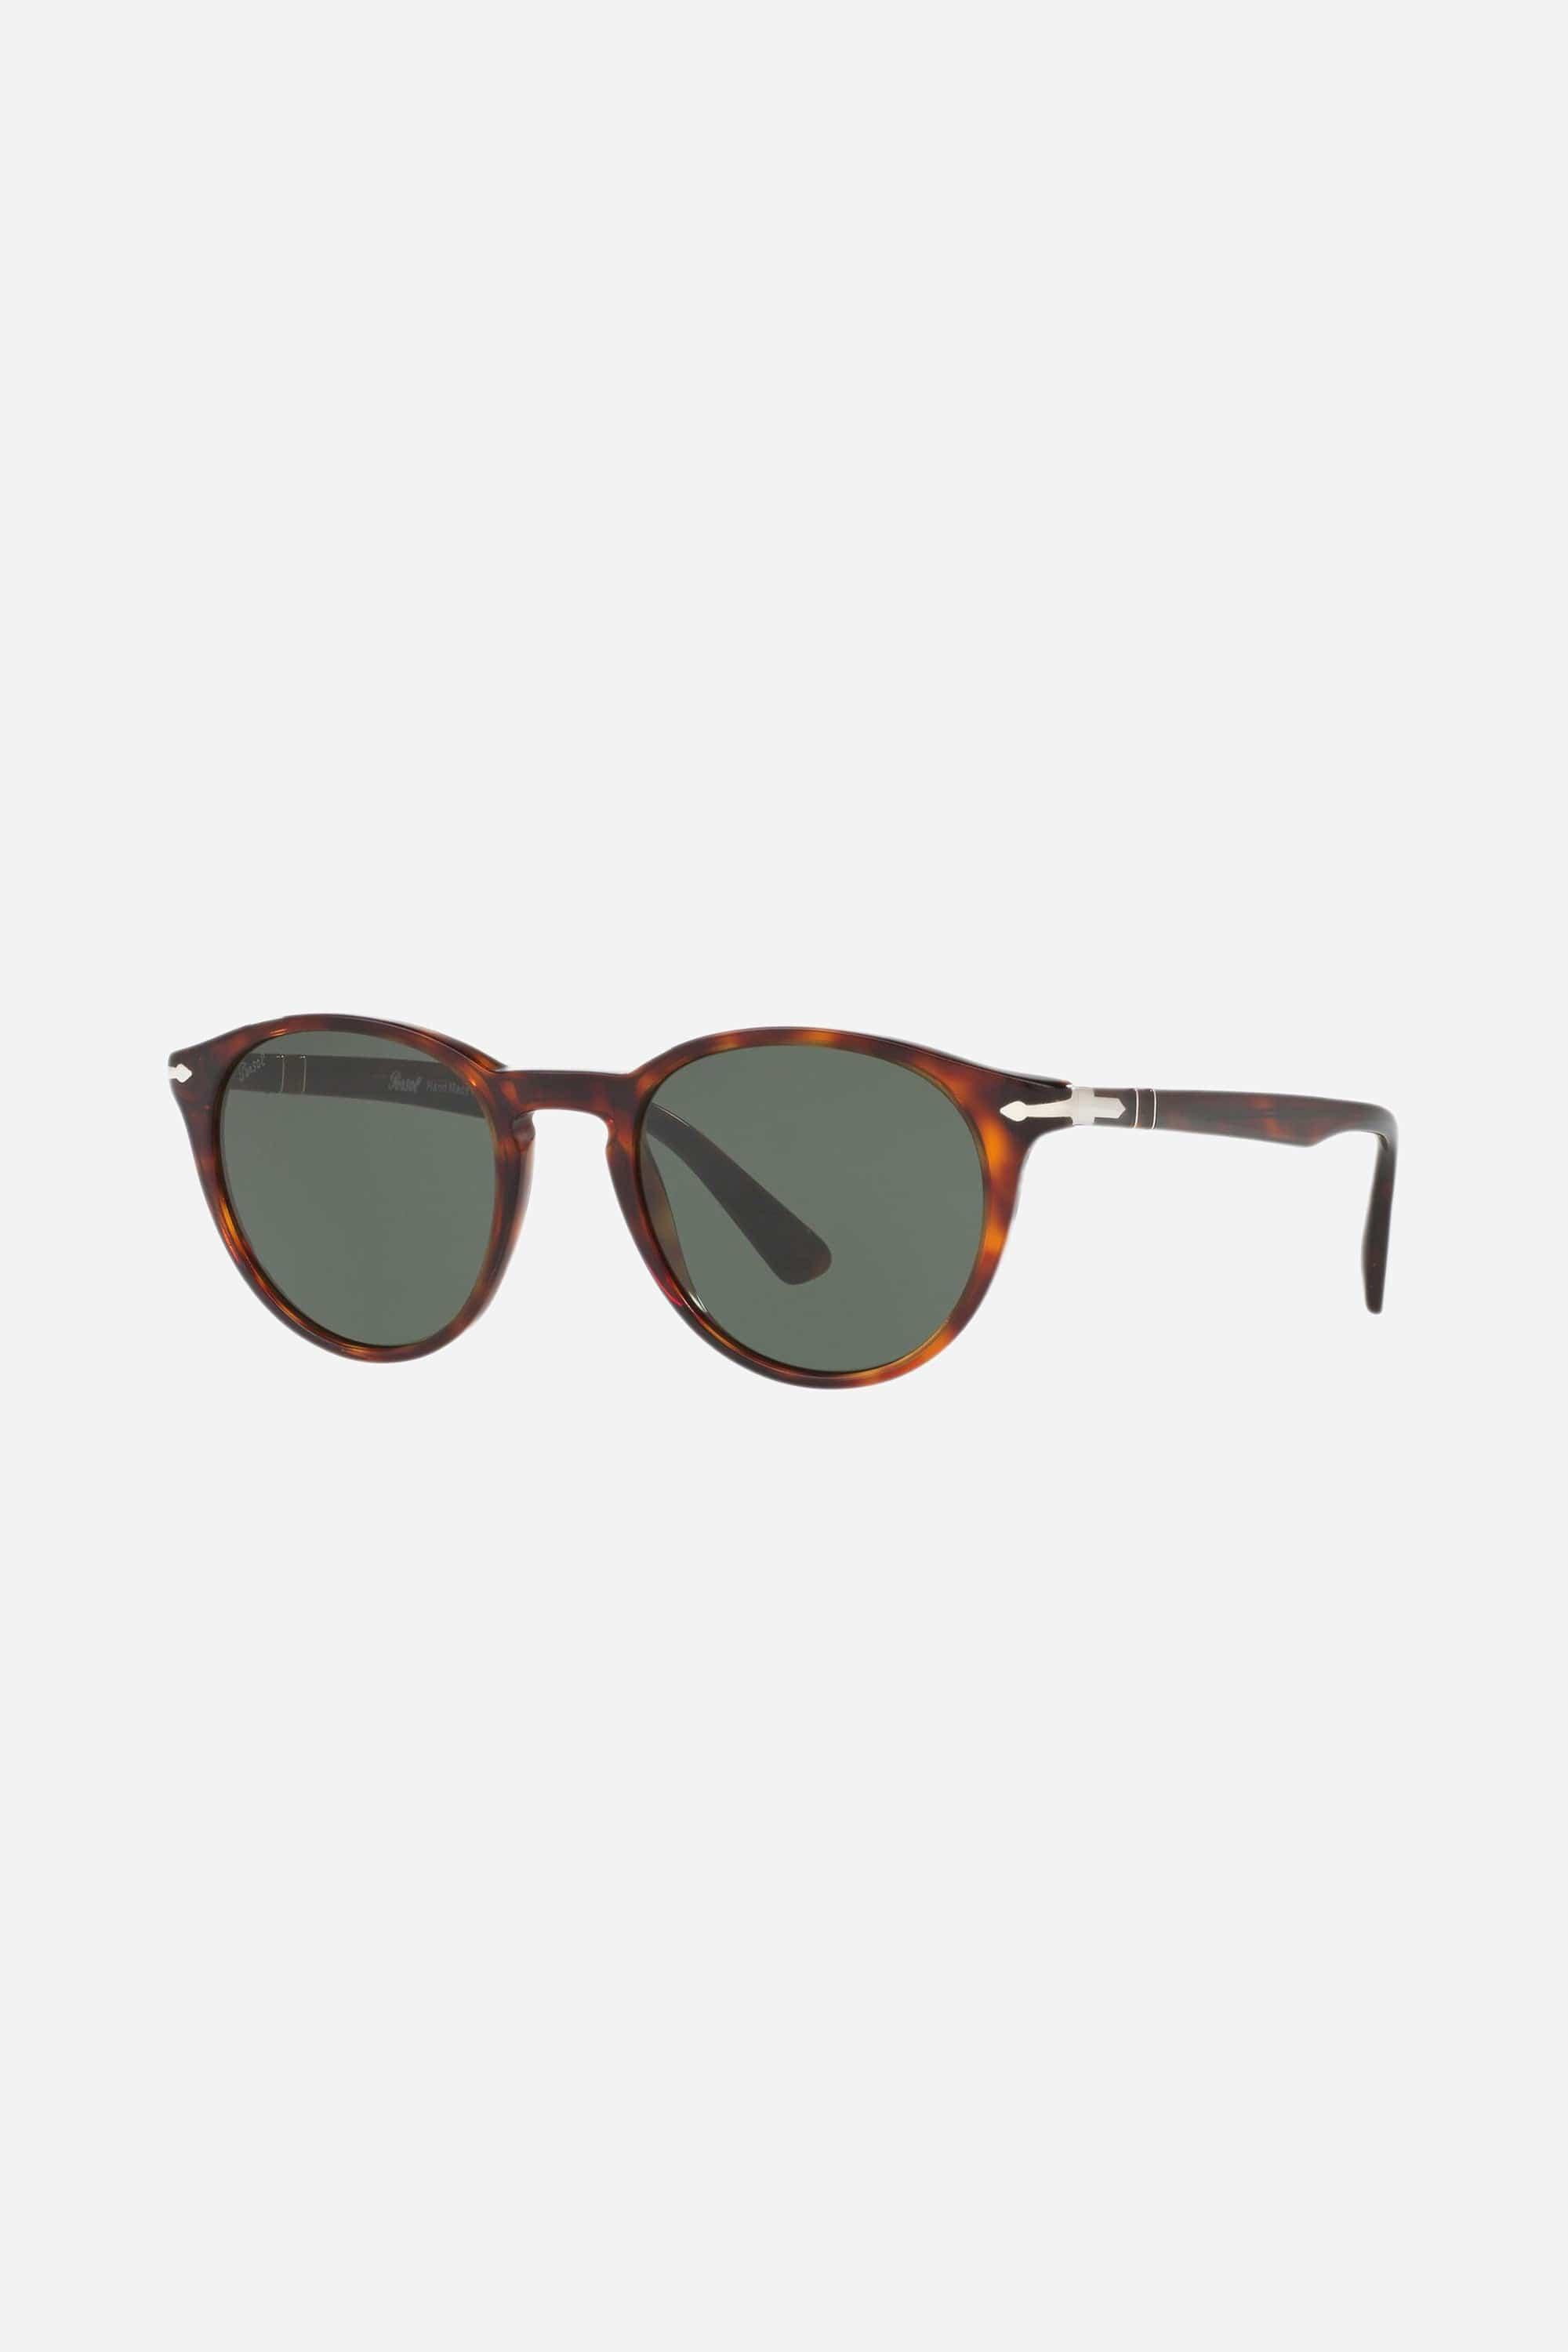 Persol 3087-S 58mm Replacement Lenses by Sunglass Fix™